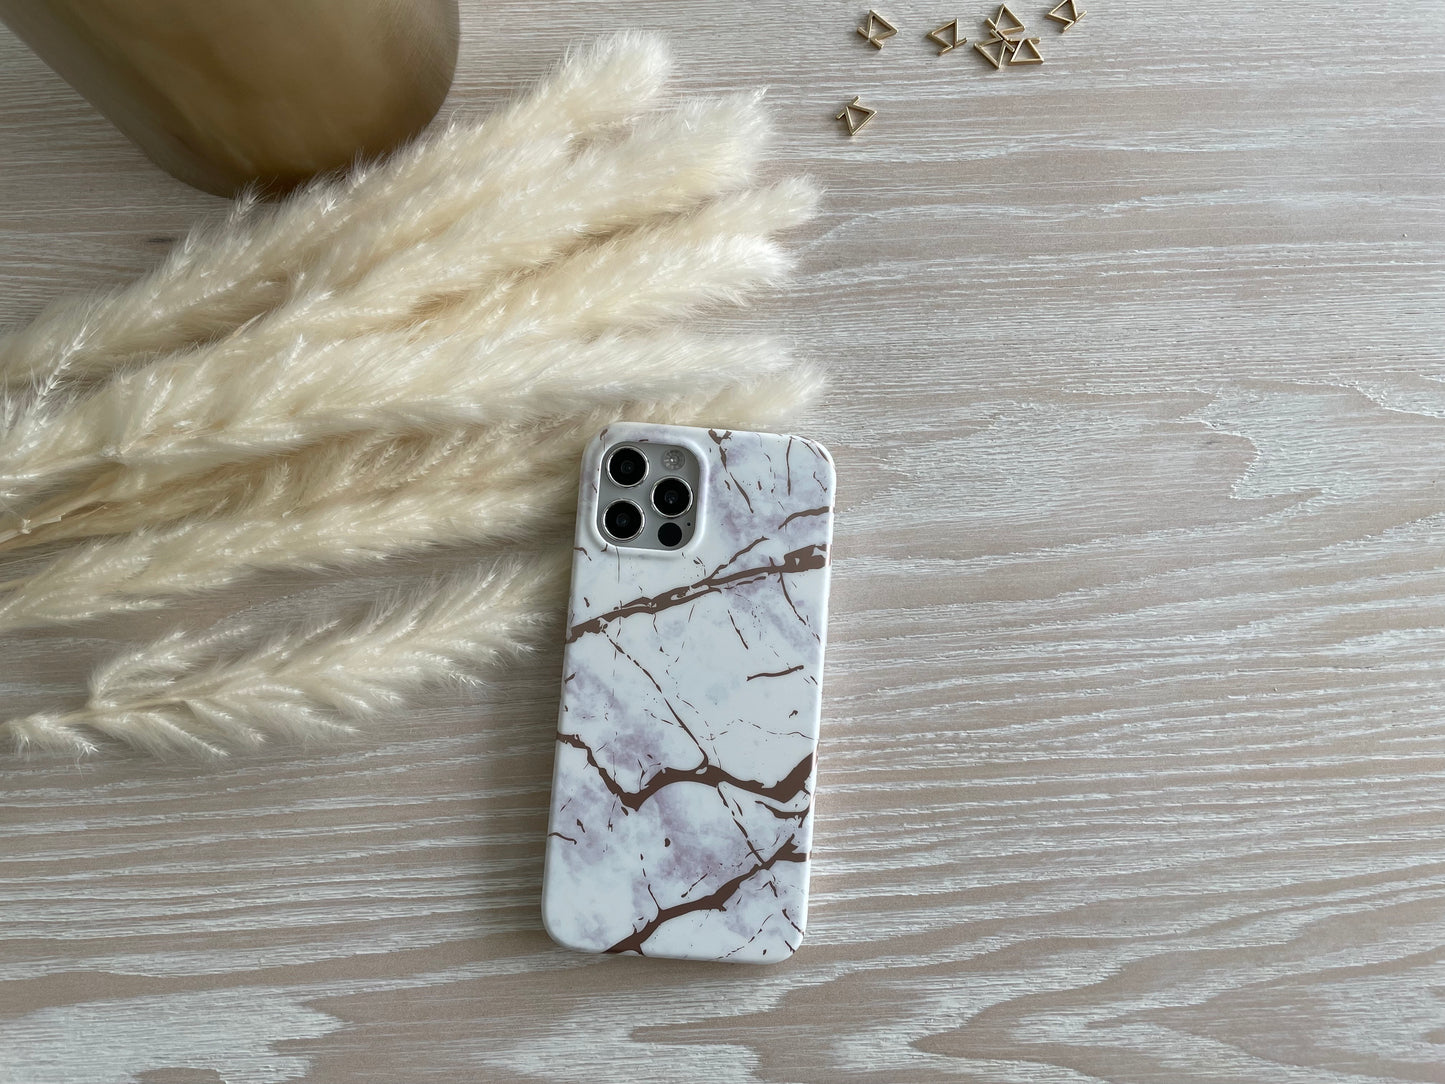 White and Rose Gold Silicon iPhone Case